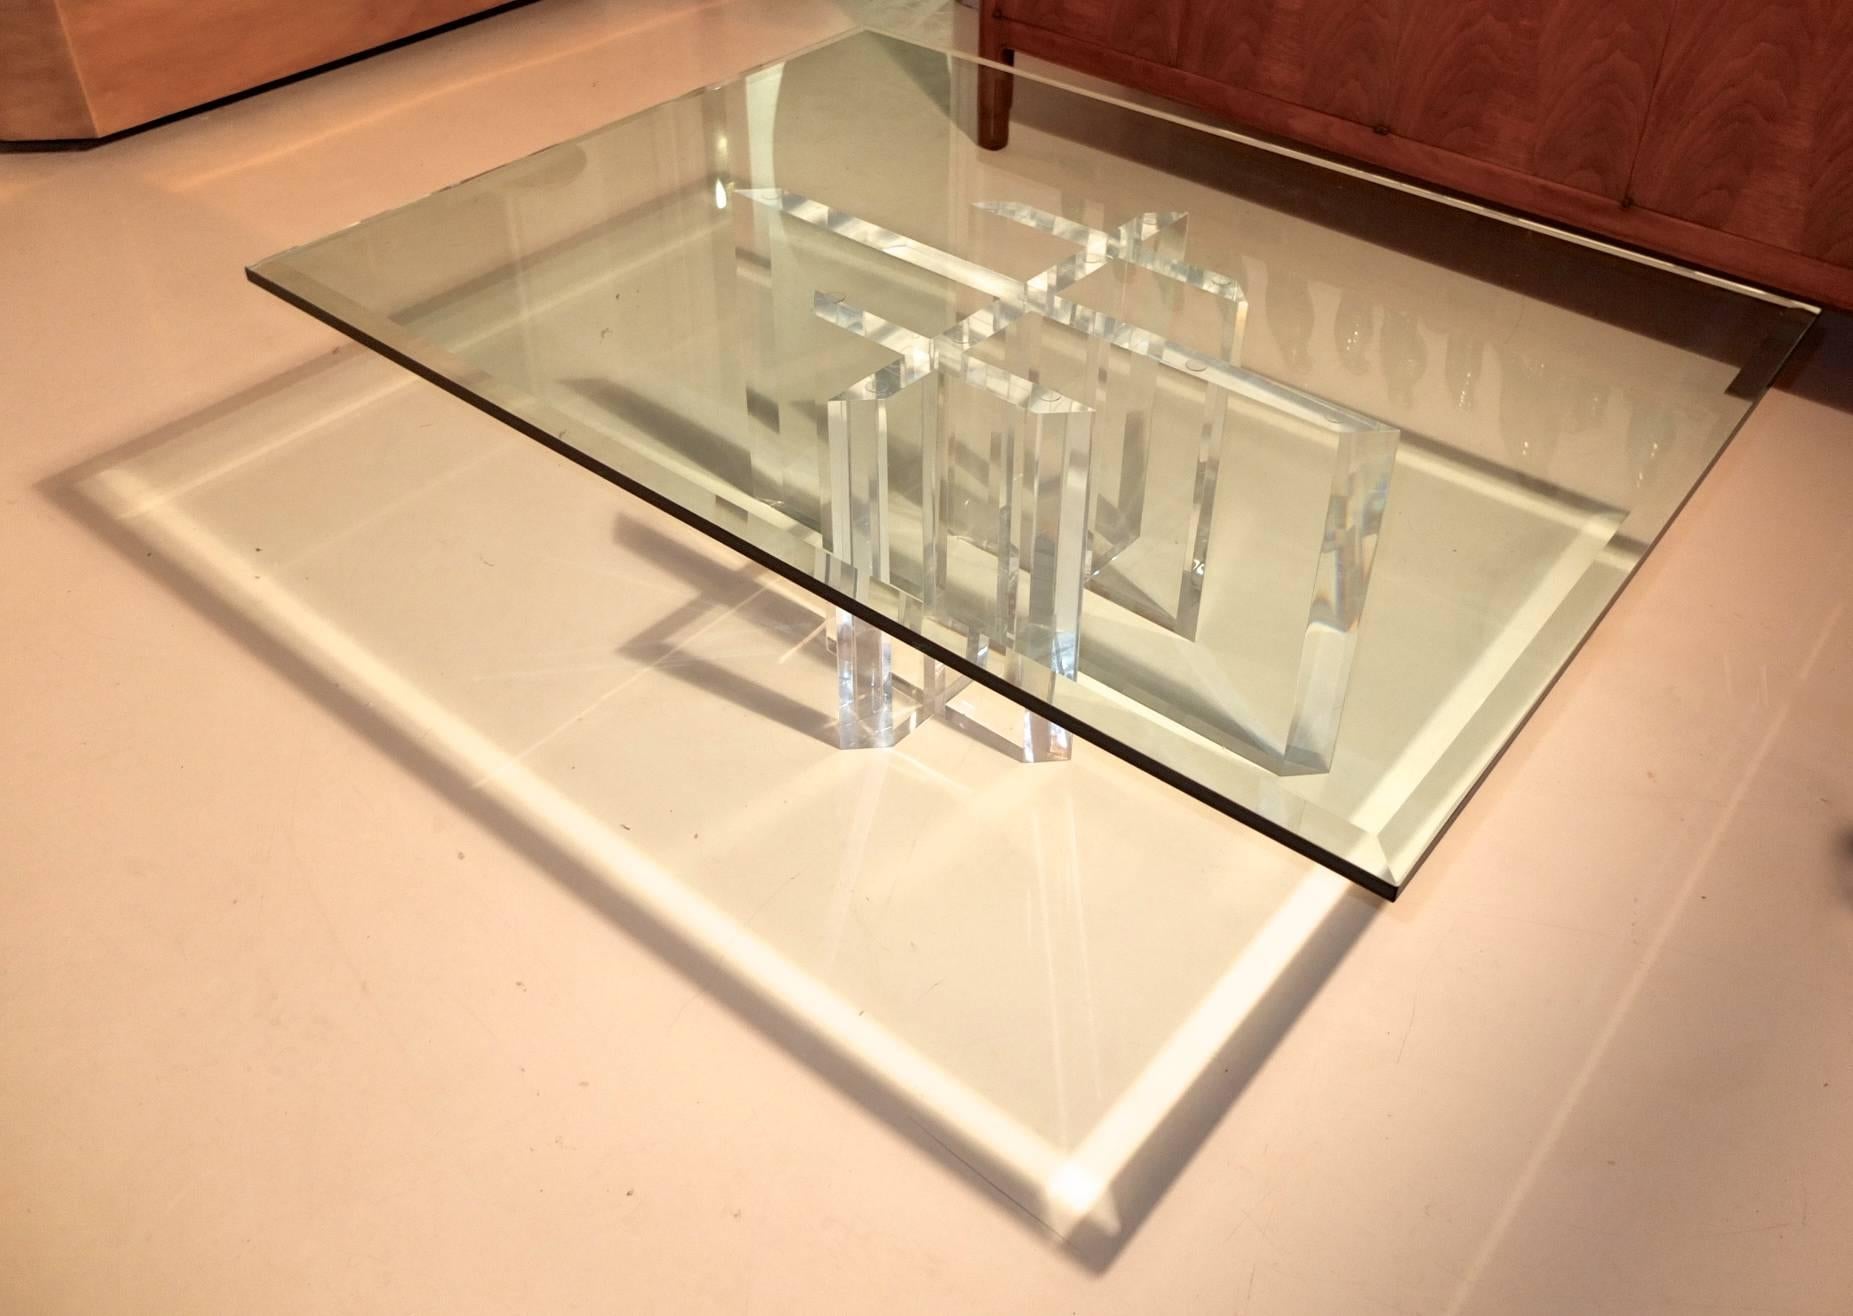 High quality 1-1/2 inch thick and heavy sculptural Lucite base attributed to John Mascheroni with a 48